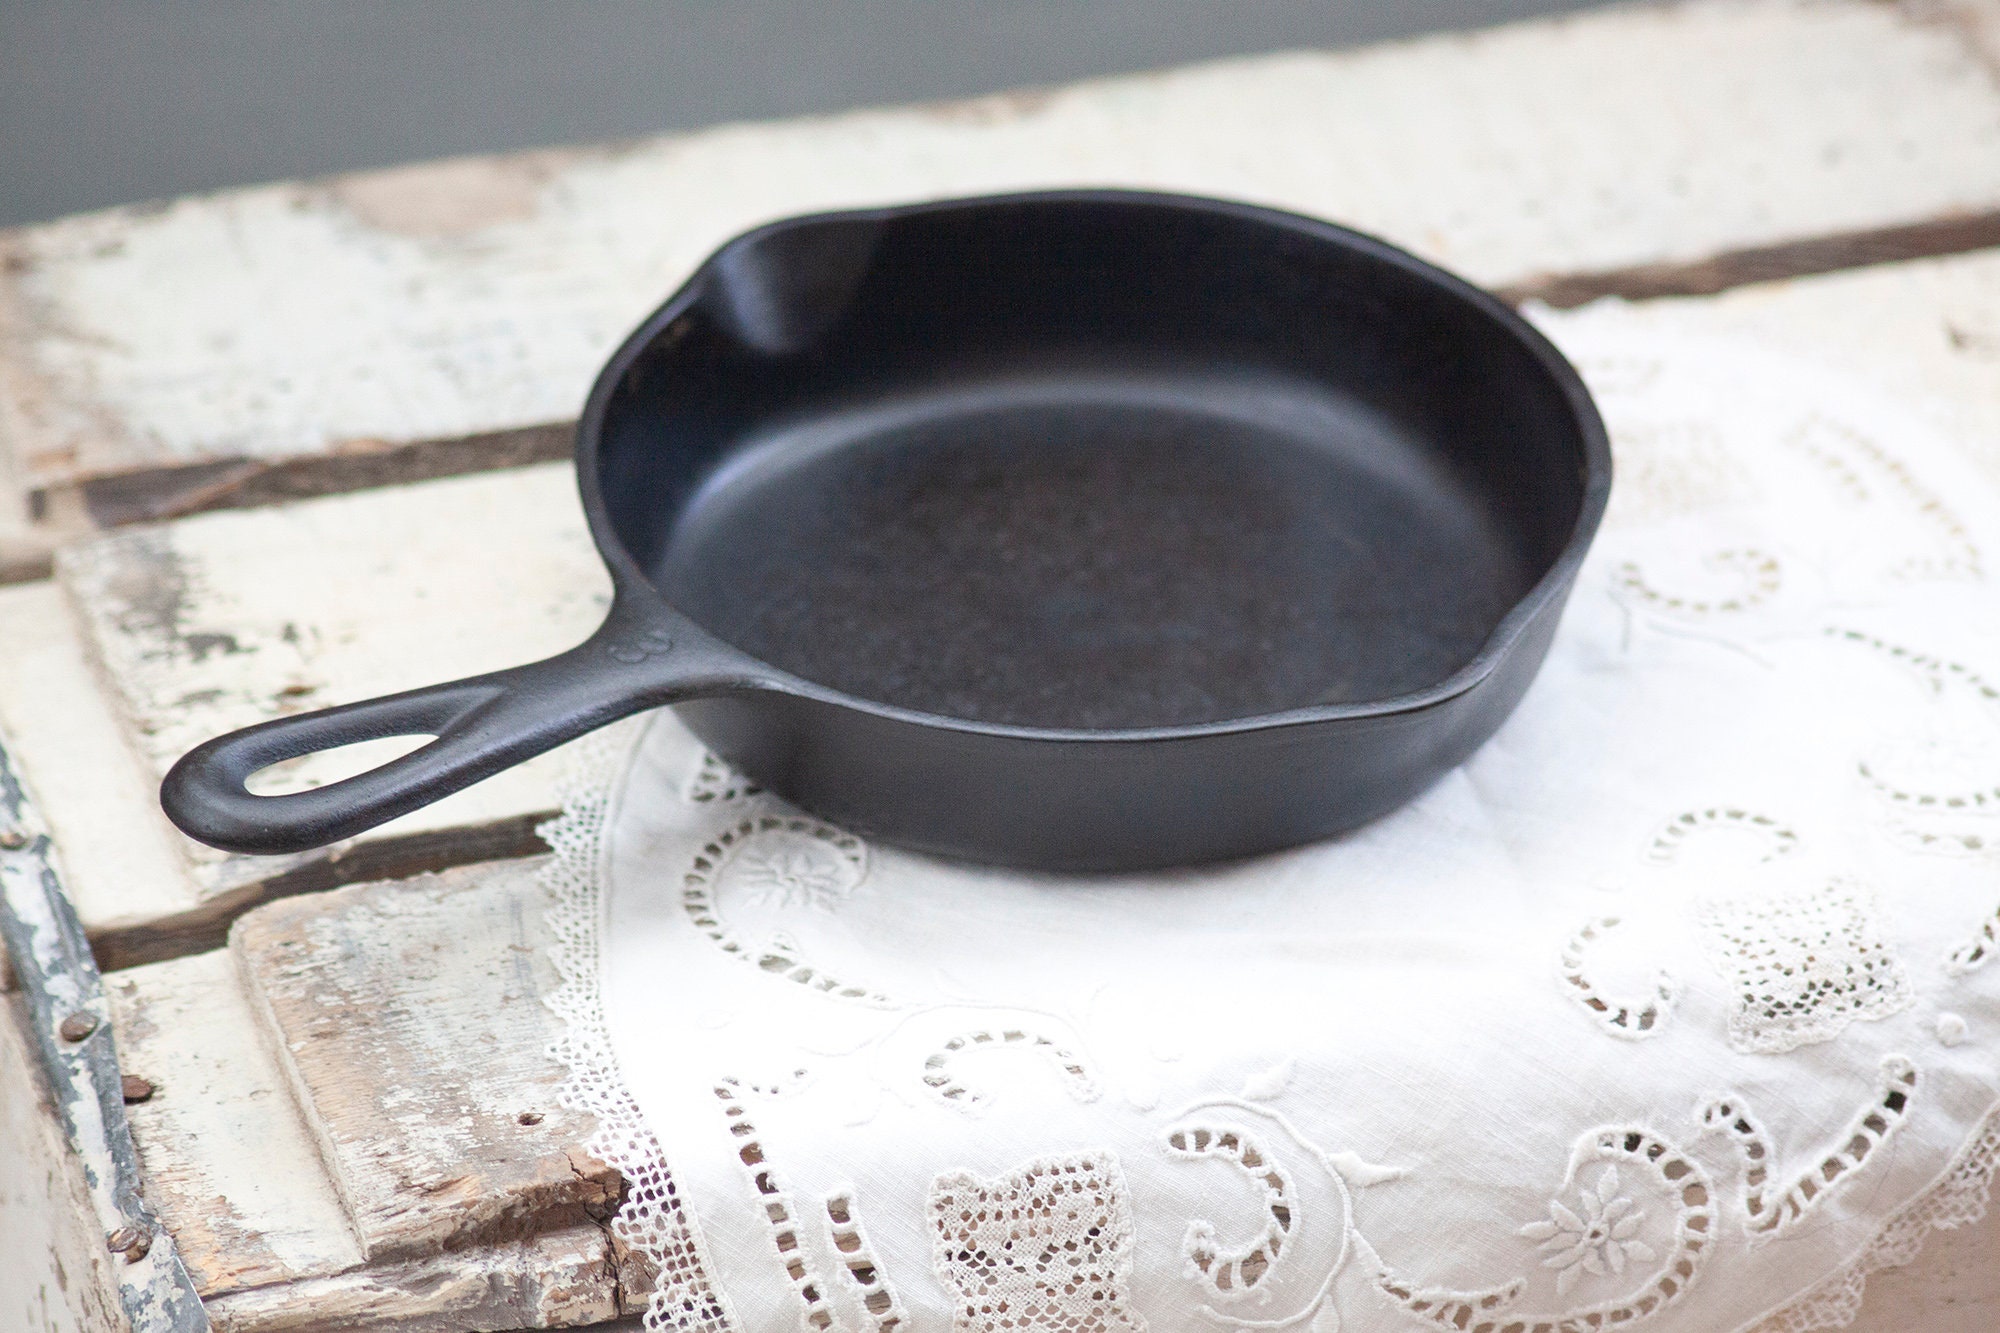 Beautiful Lodge 10, 12 Cast Iron Skillet Manufactured in the 1940's-1950's  in Excellent Condition. 